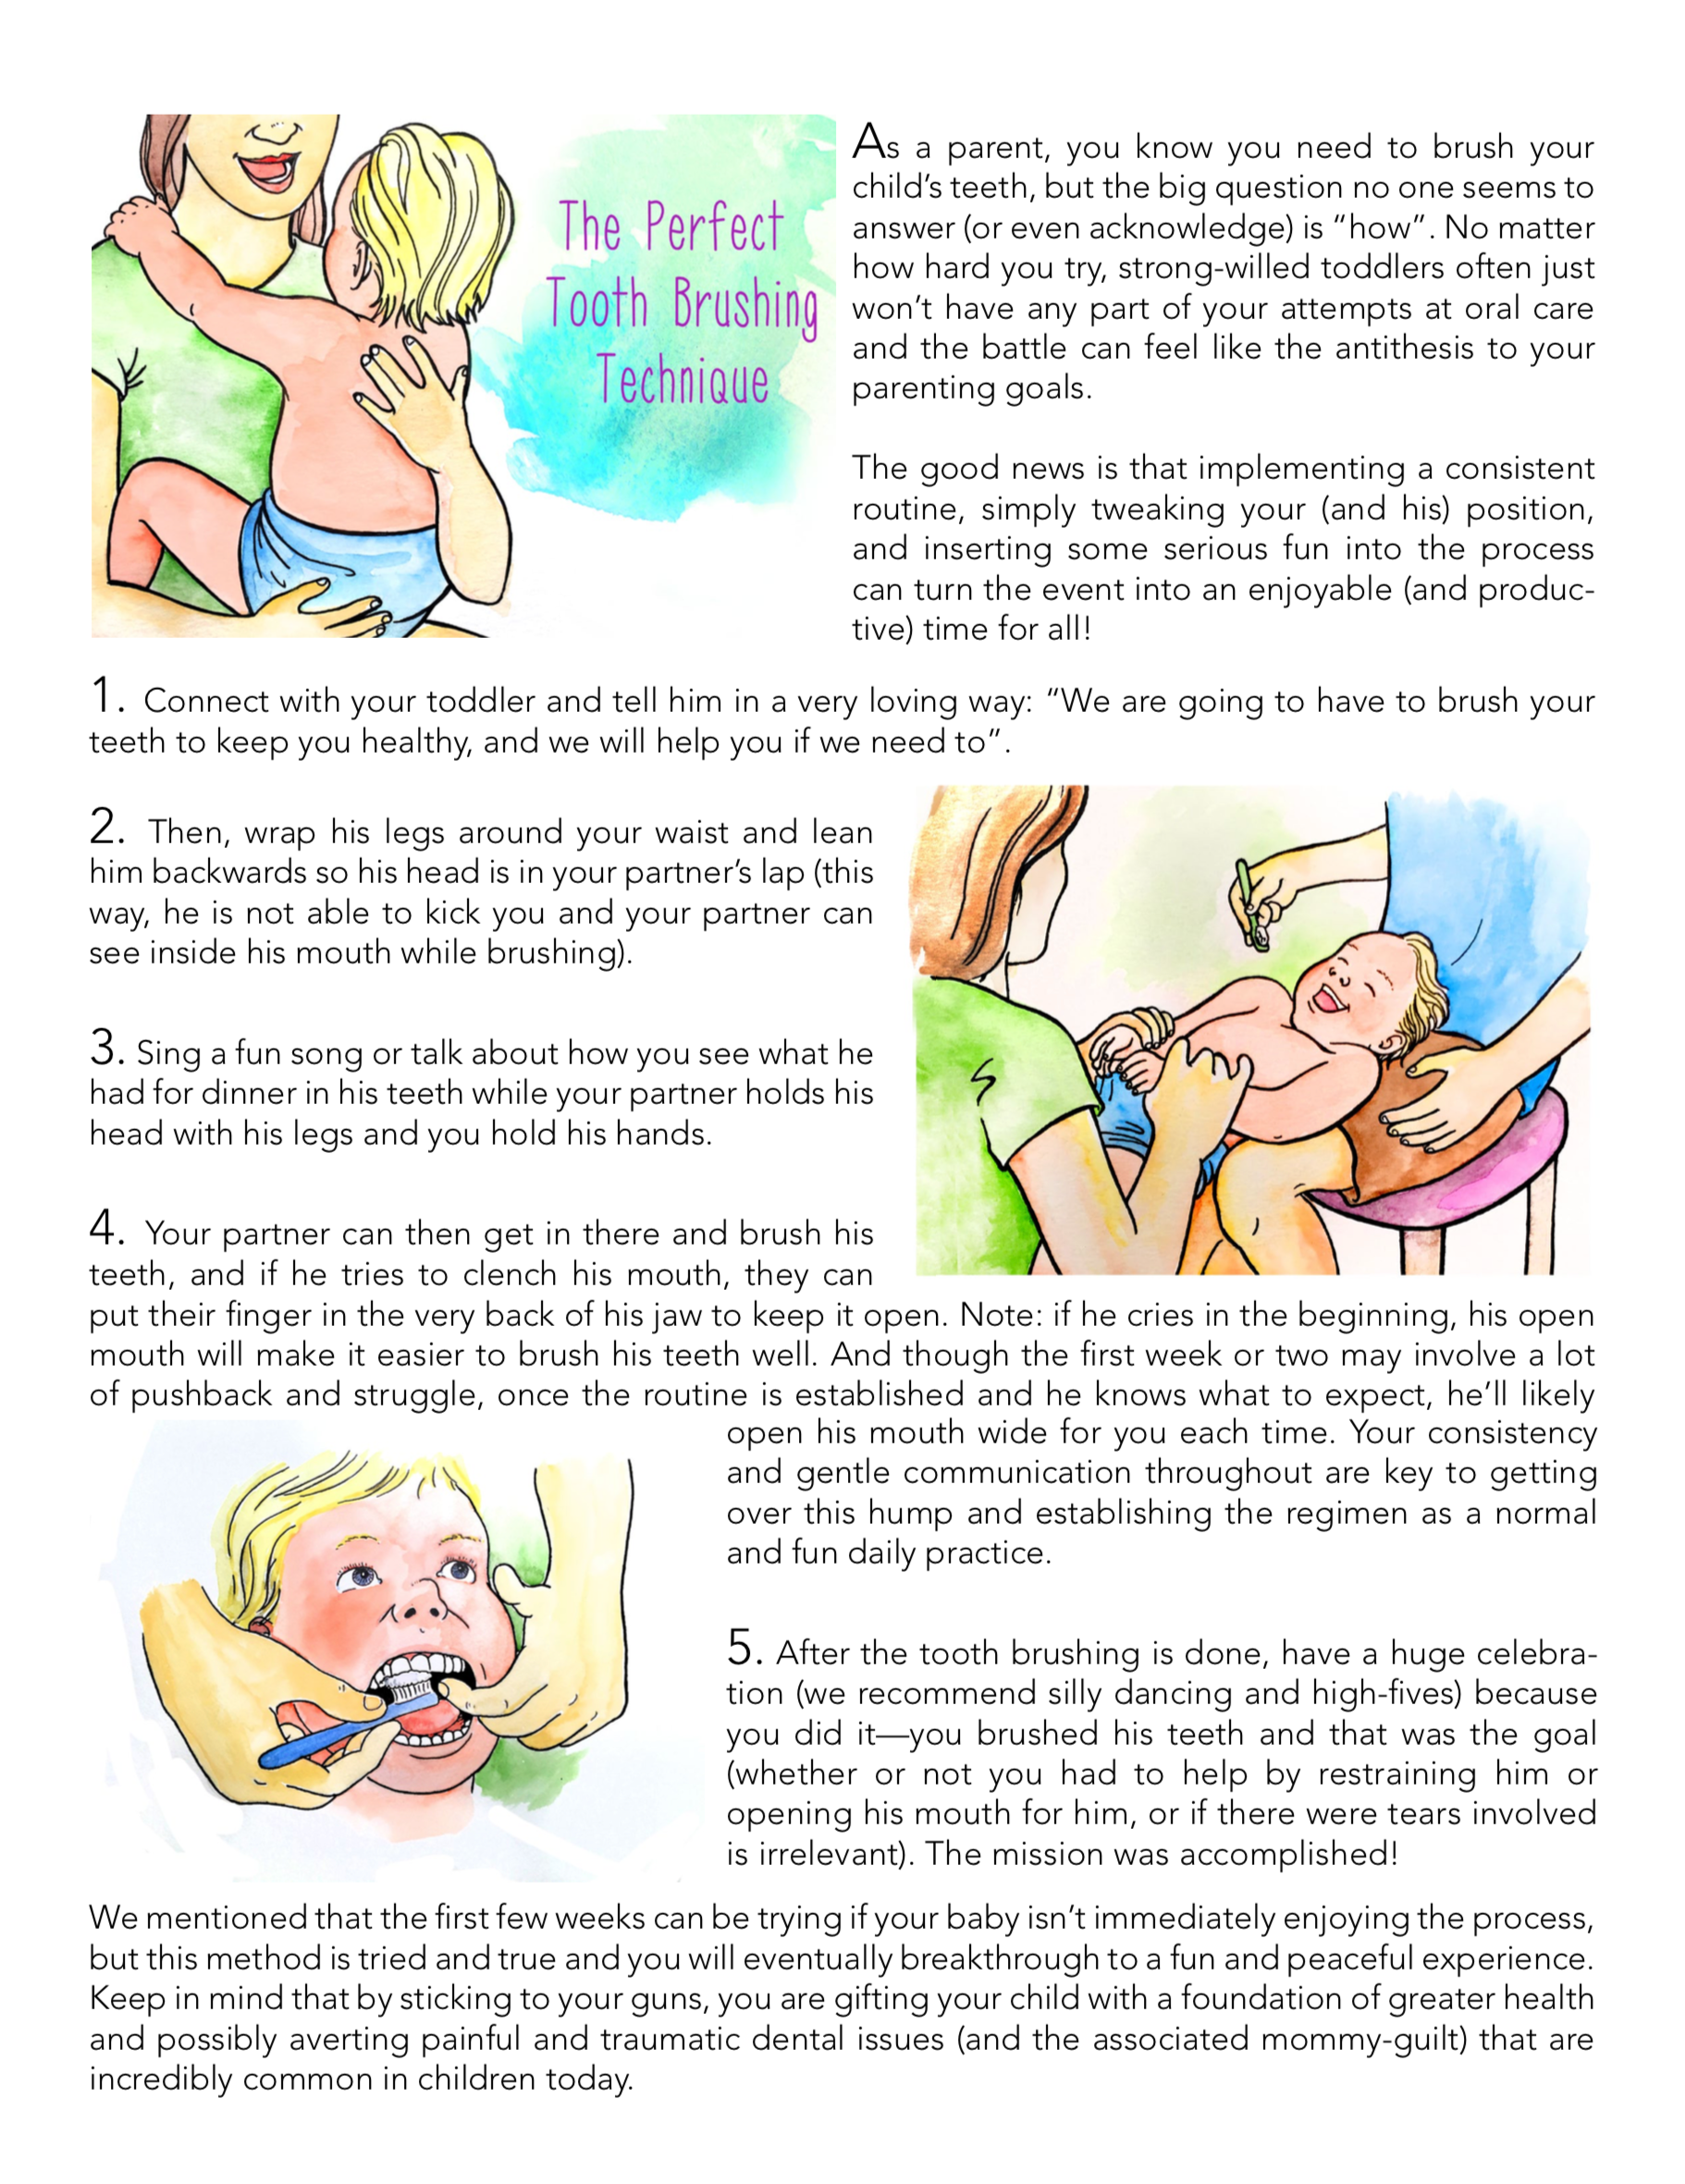 The perfect brushing technique guide tips and guides Asheville Pediatric Dentistry (828) 277-6788